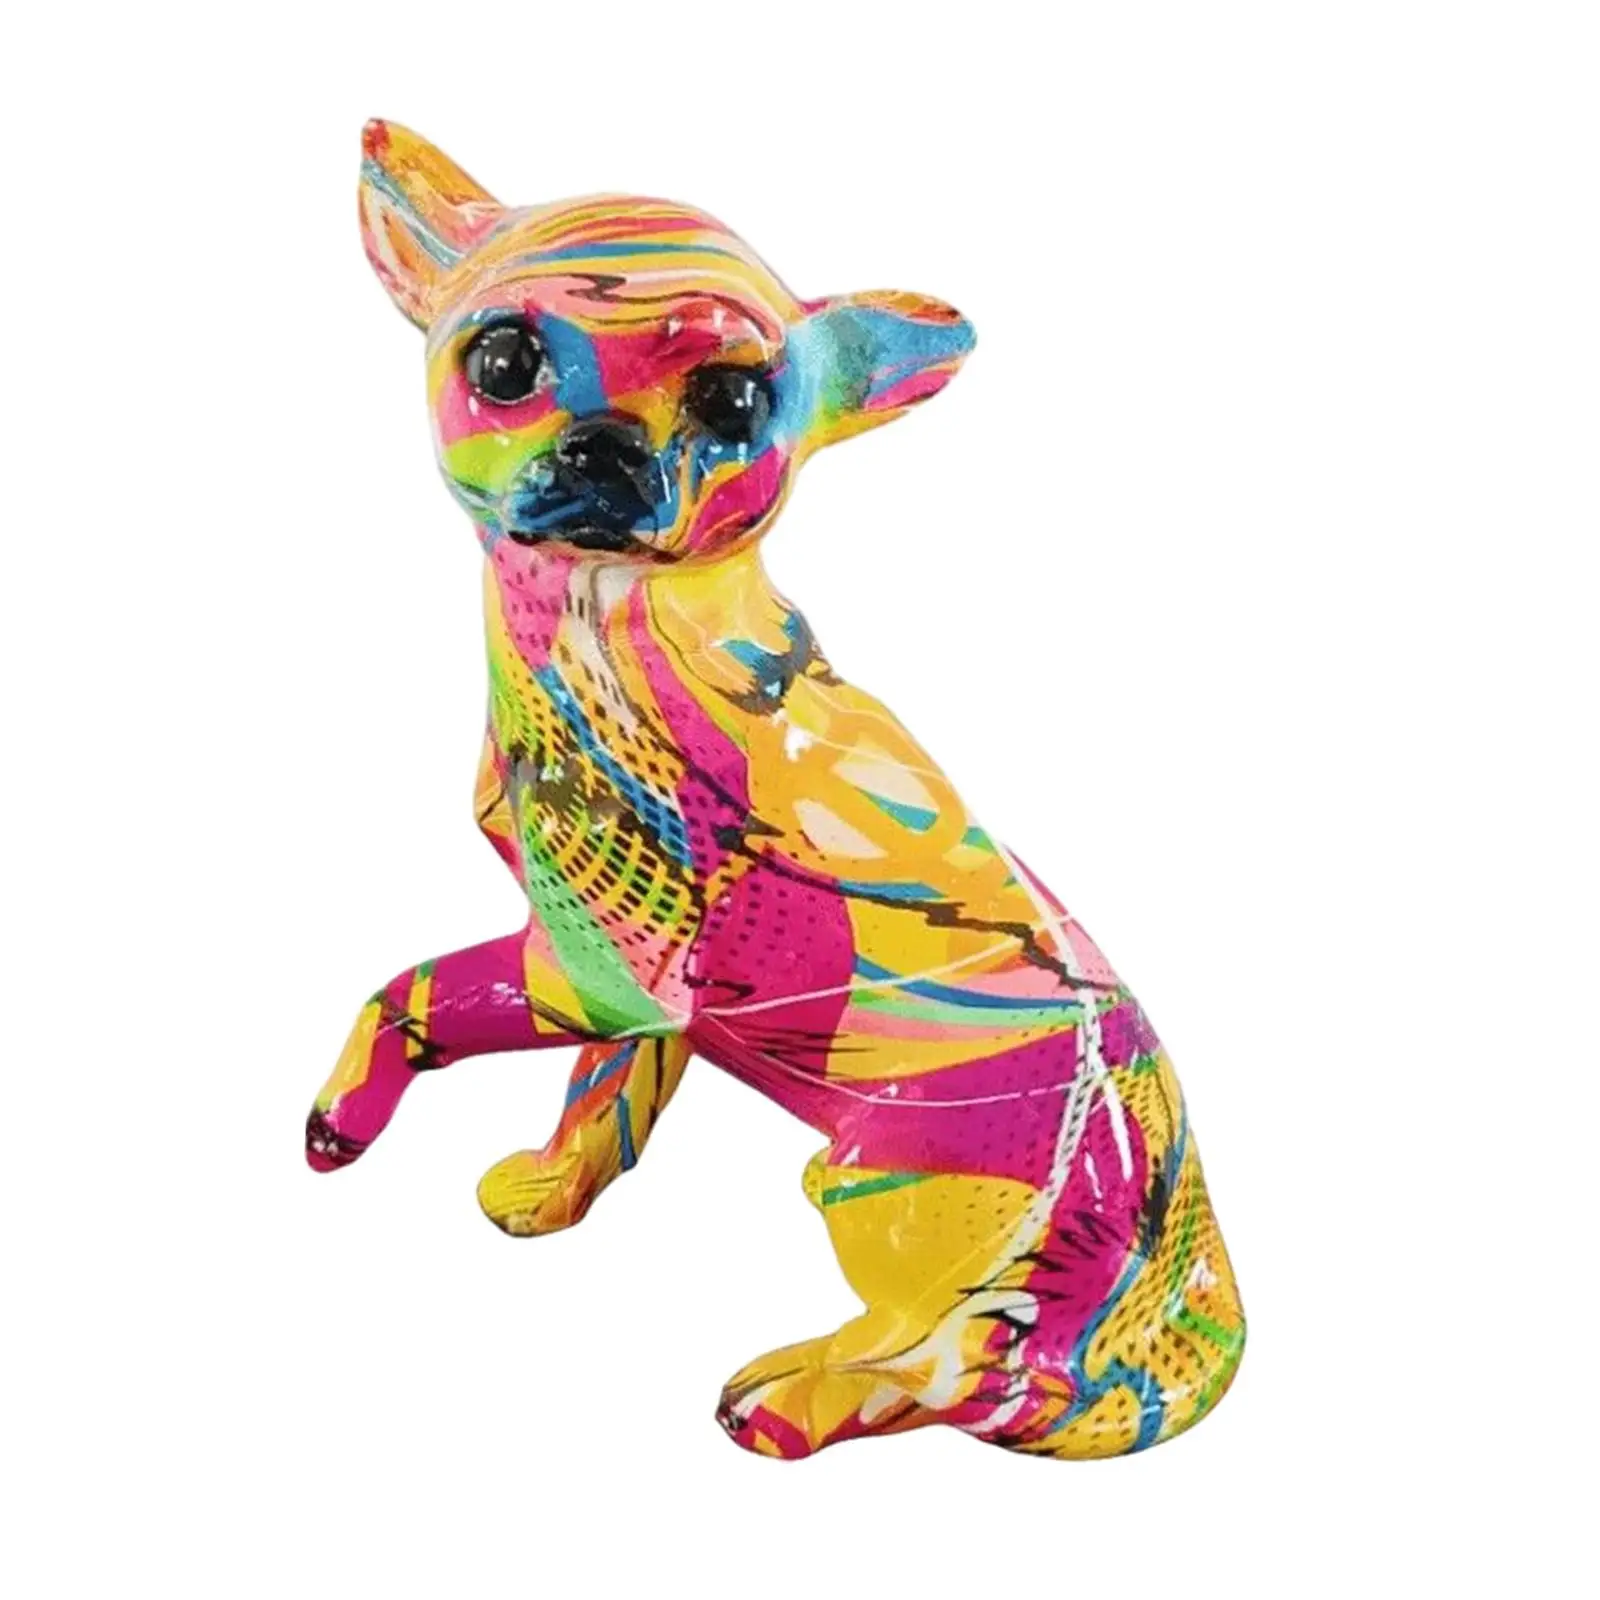 Graffiti Chihuahua Dog Statue Animal Statue for Living Room Dog Lover Gifts